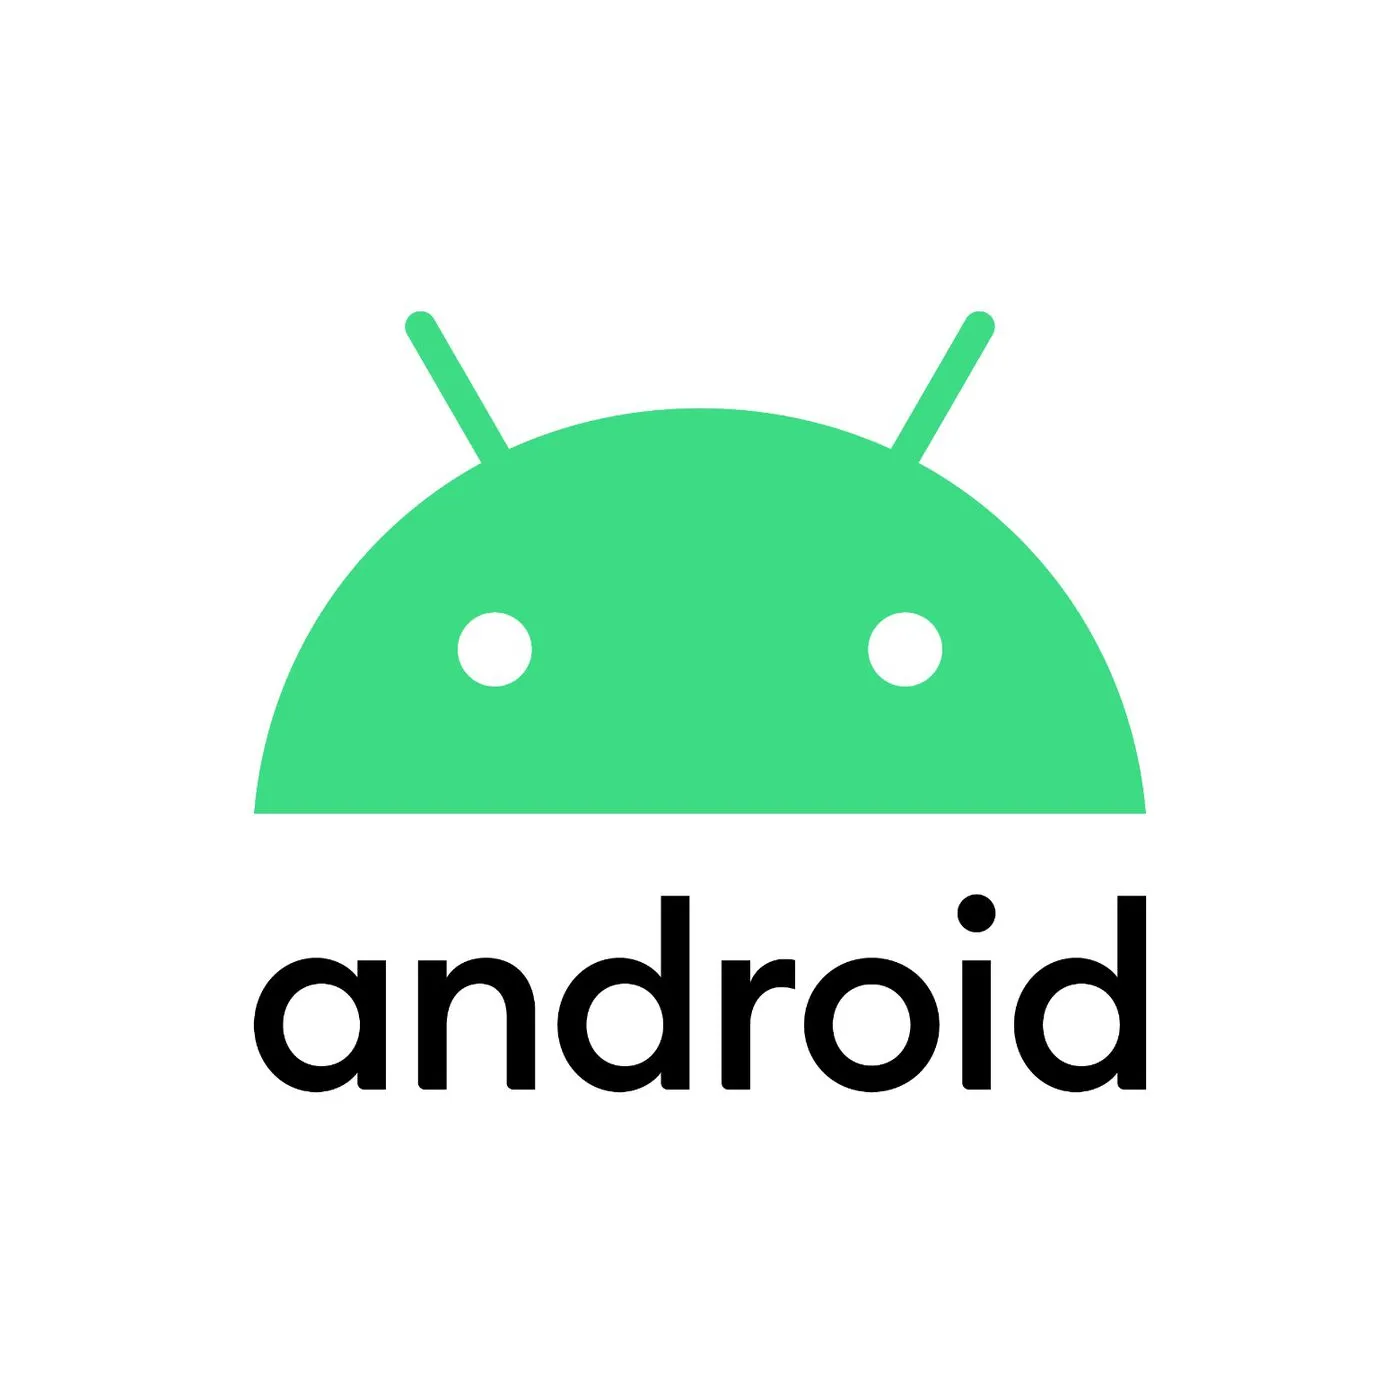 Android logo with "android" written below it